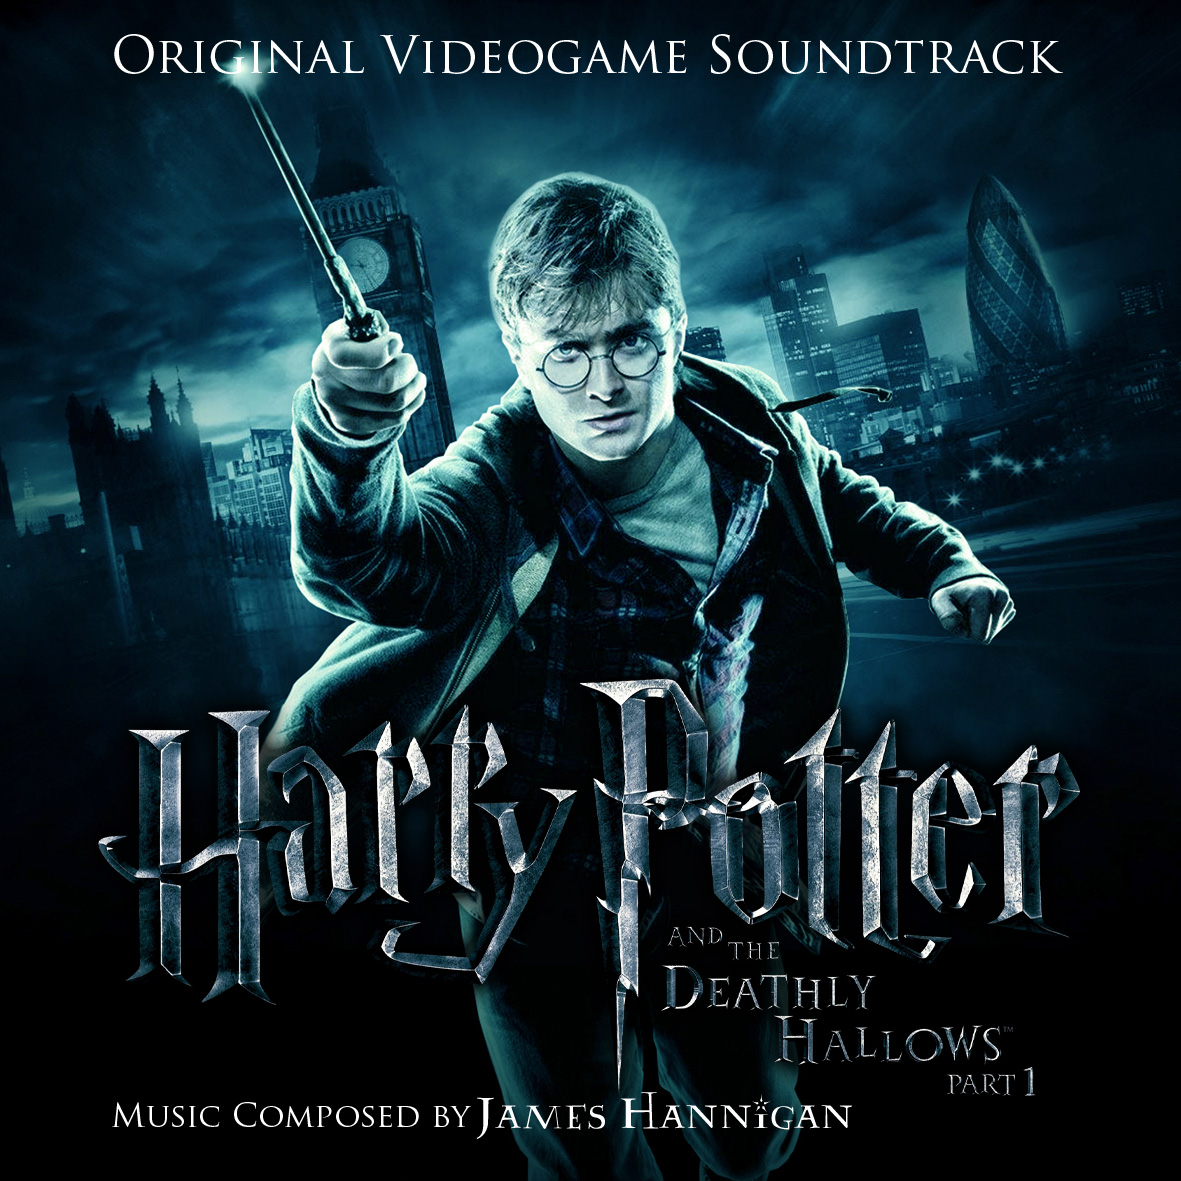 harry potter and the deathly hallows pt 2 soundtrack